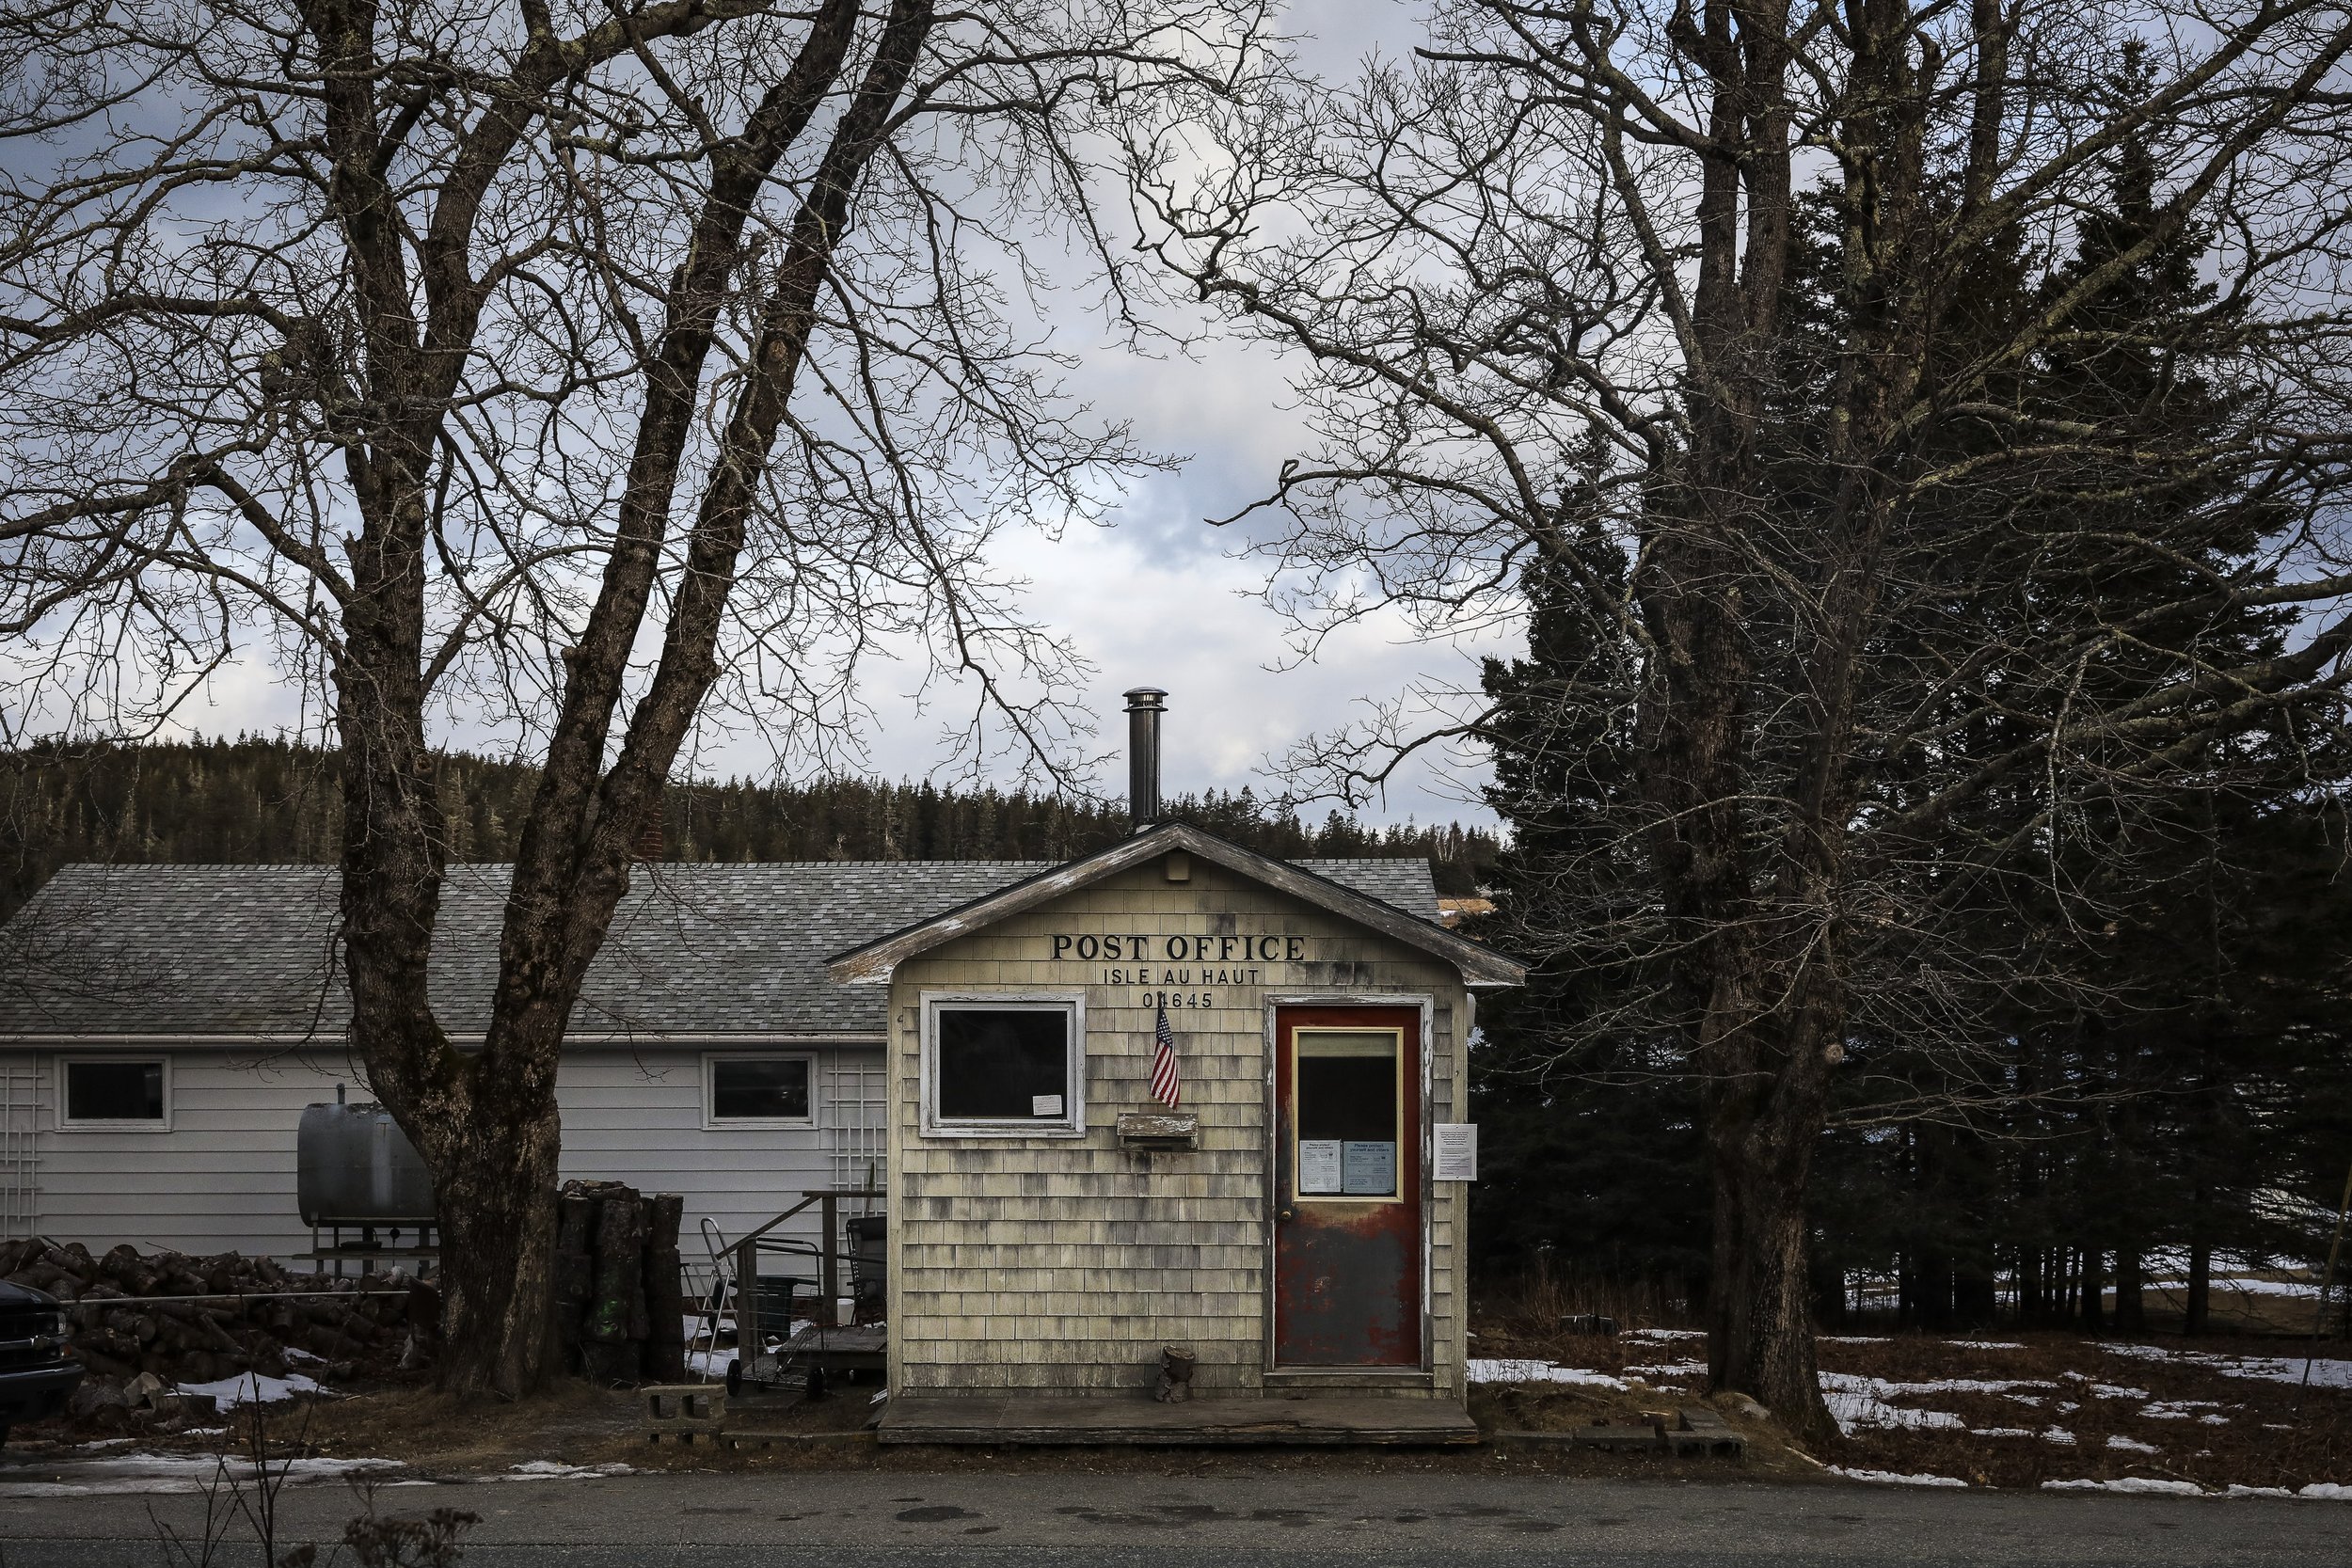  Isle au Haut has 40-50 residents who live on the island during the winter season and a summer population of 300. It has just one post office where residents have PO boxes. There is no delivery. 